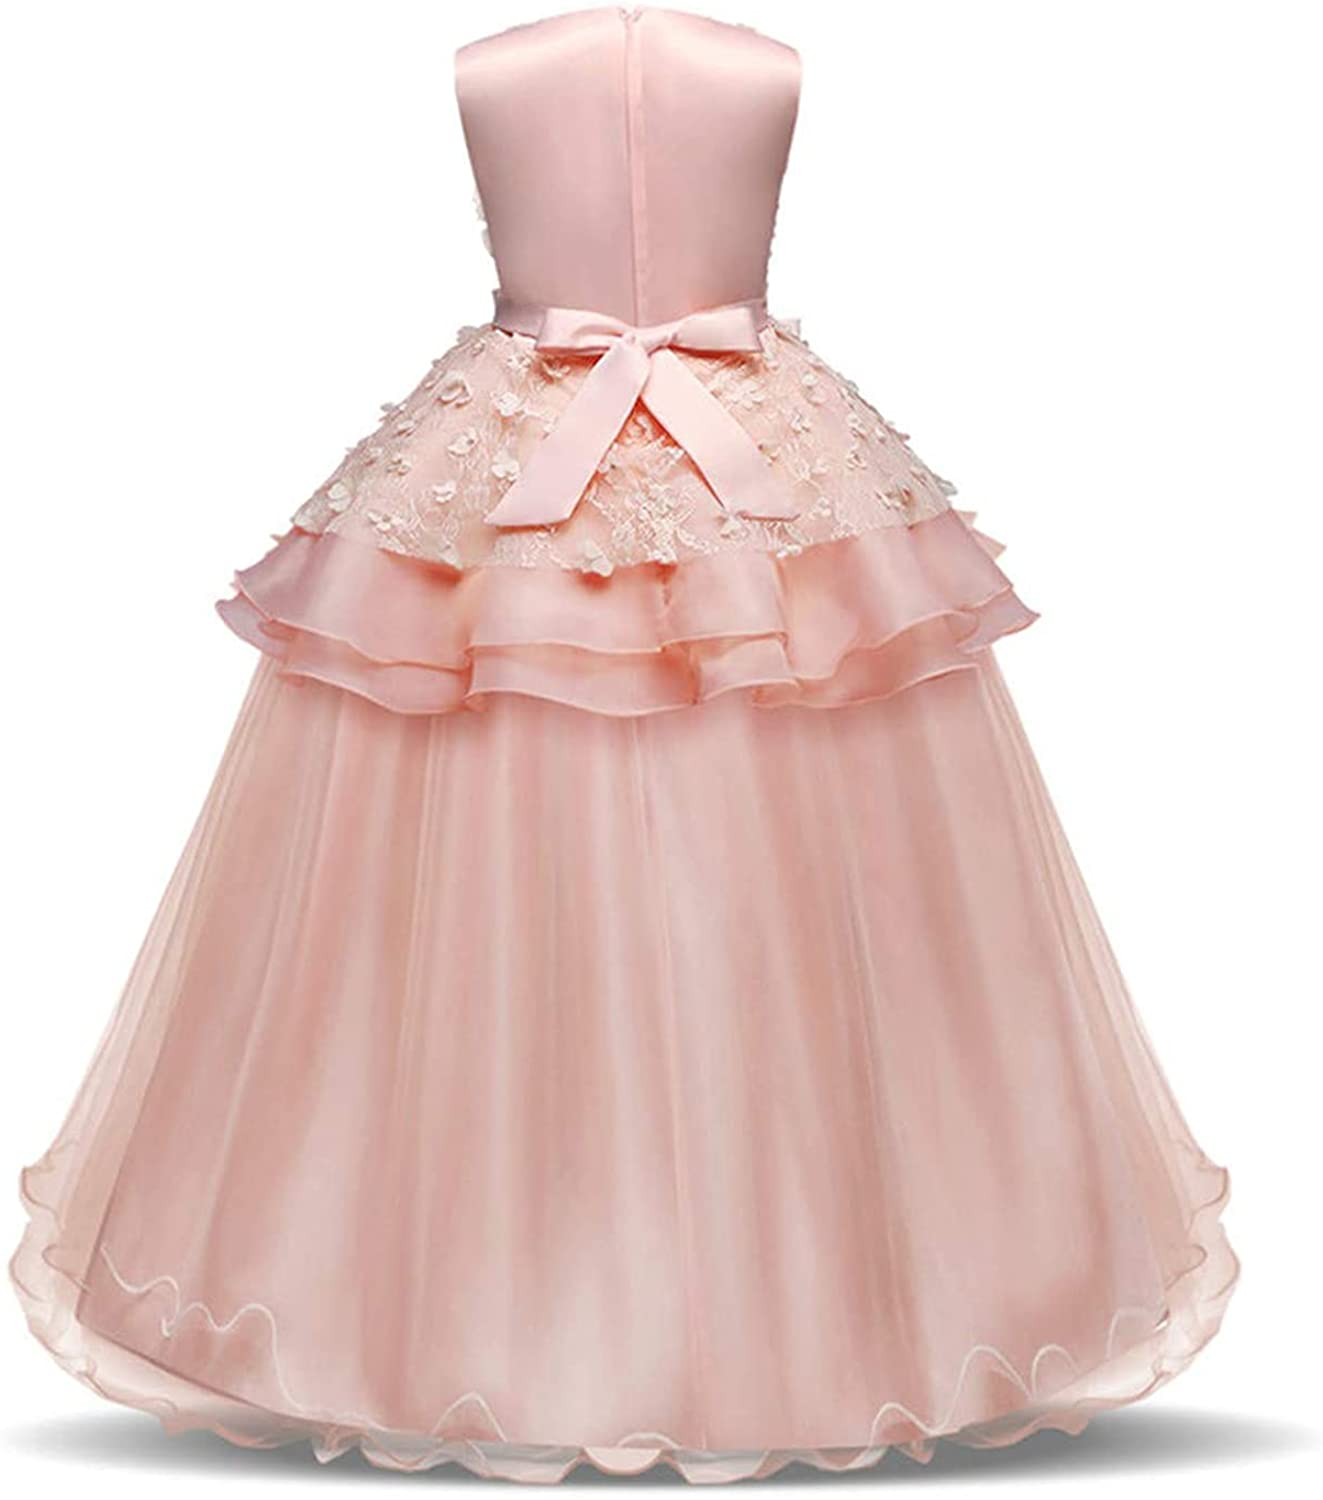 "Girl's Sleeveless Embroidery Princess Pageant Dress"